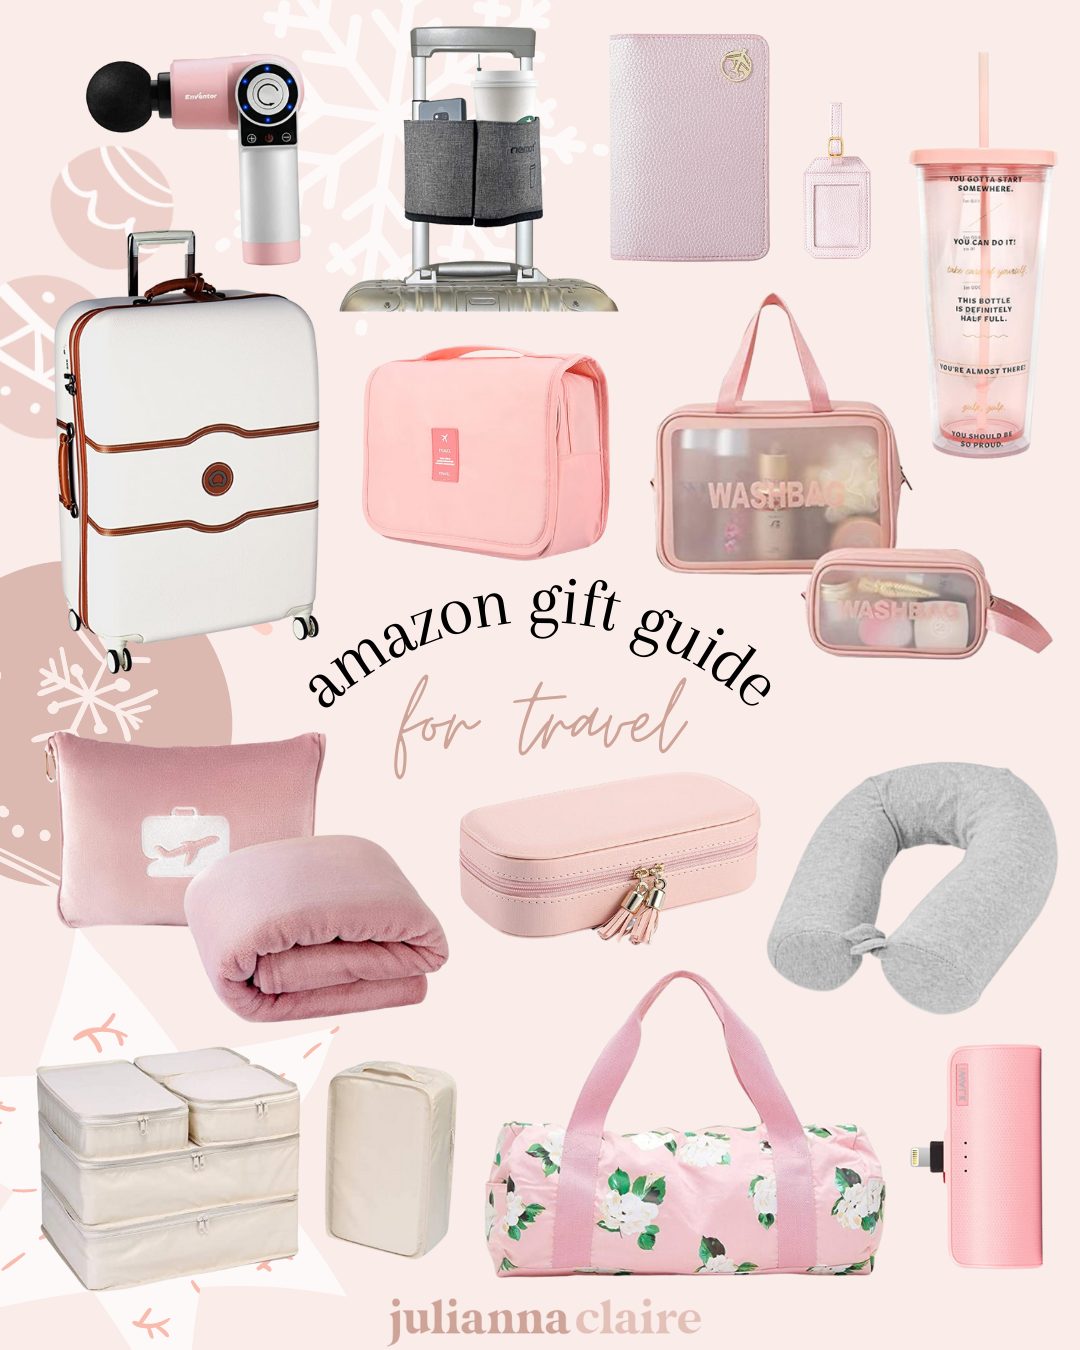 Amazon Holiday Gift Guides - Julianna Claire